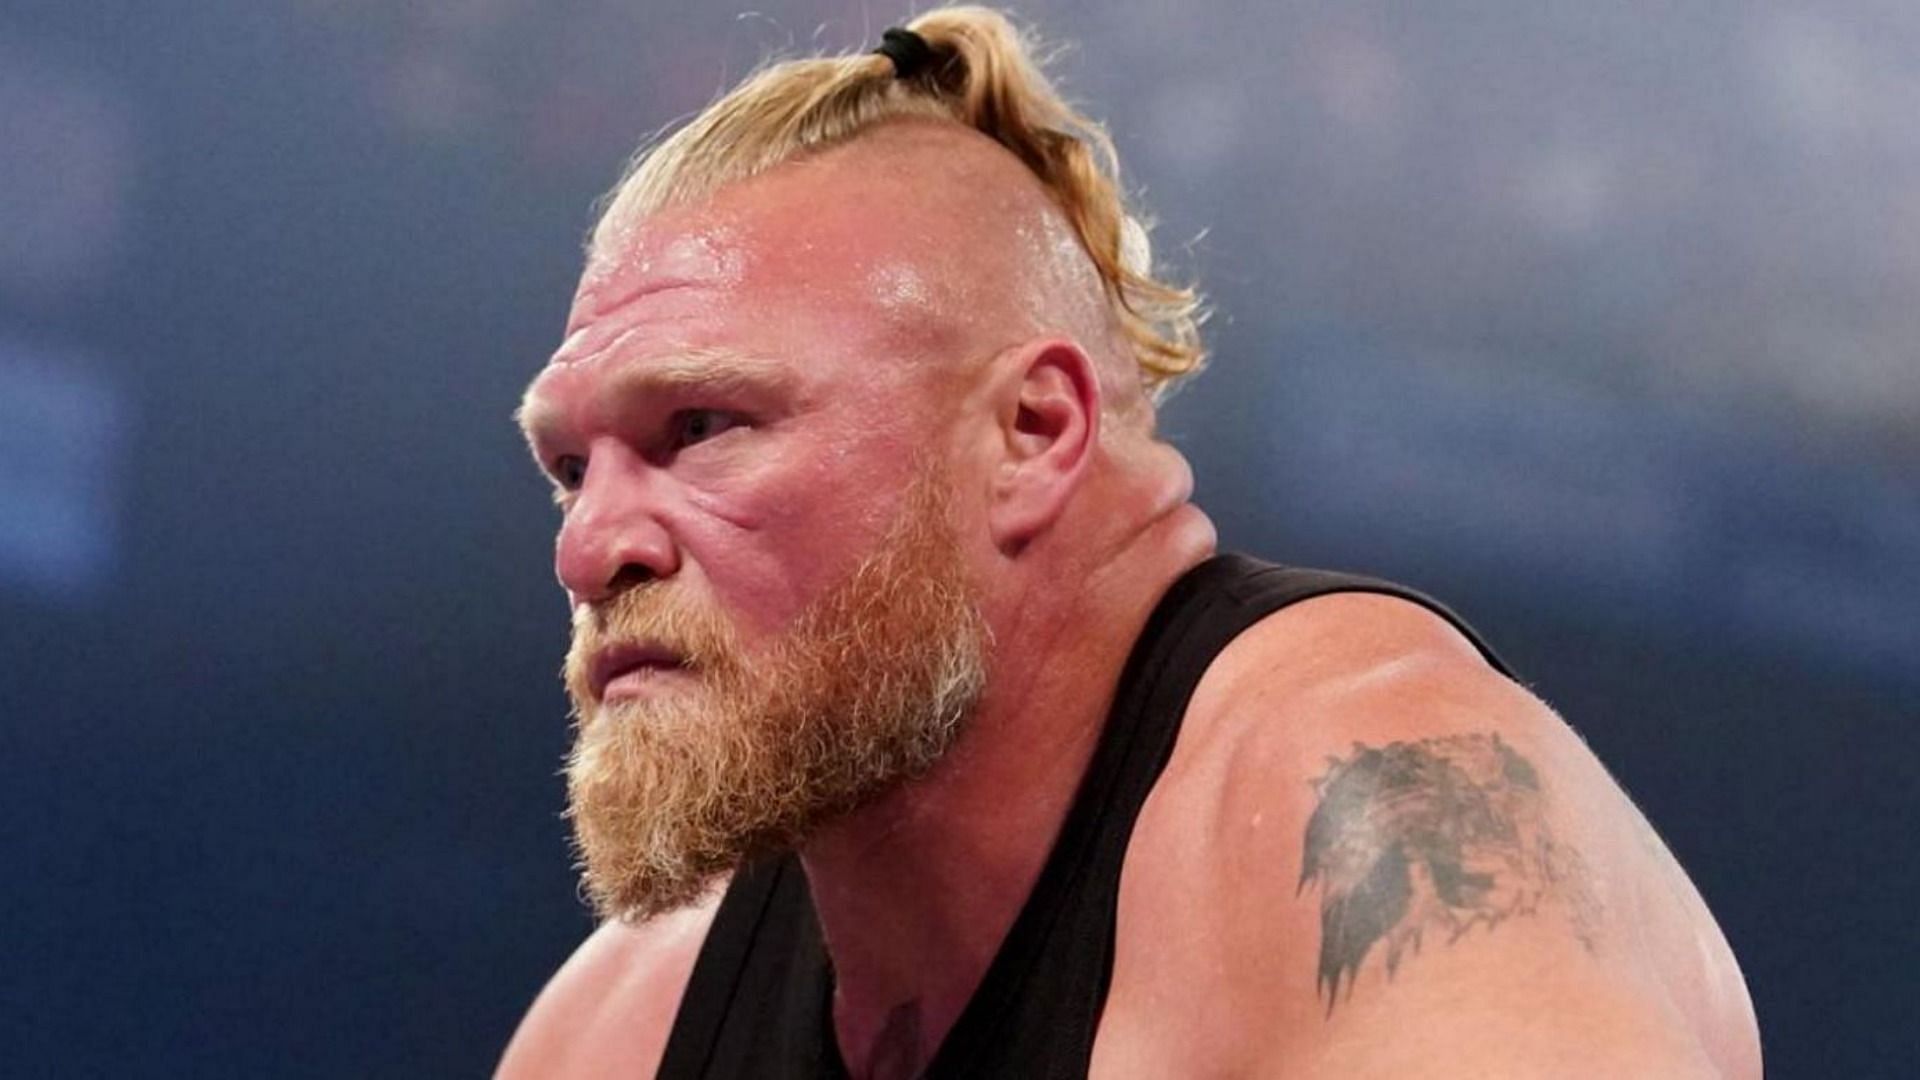 The Beast Incarnate is one of the most dominating WWE Superstars of all time